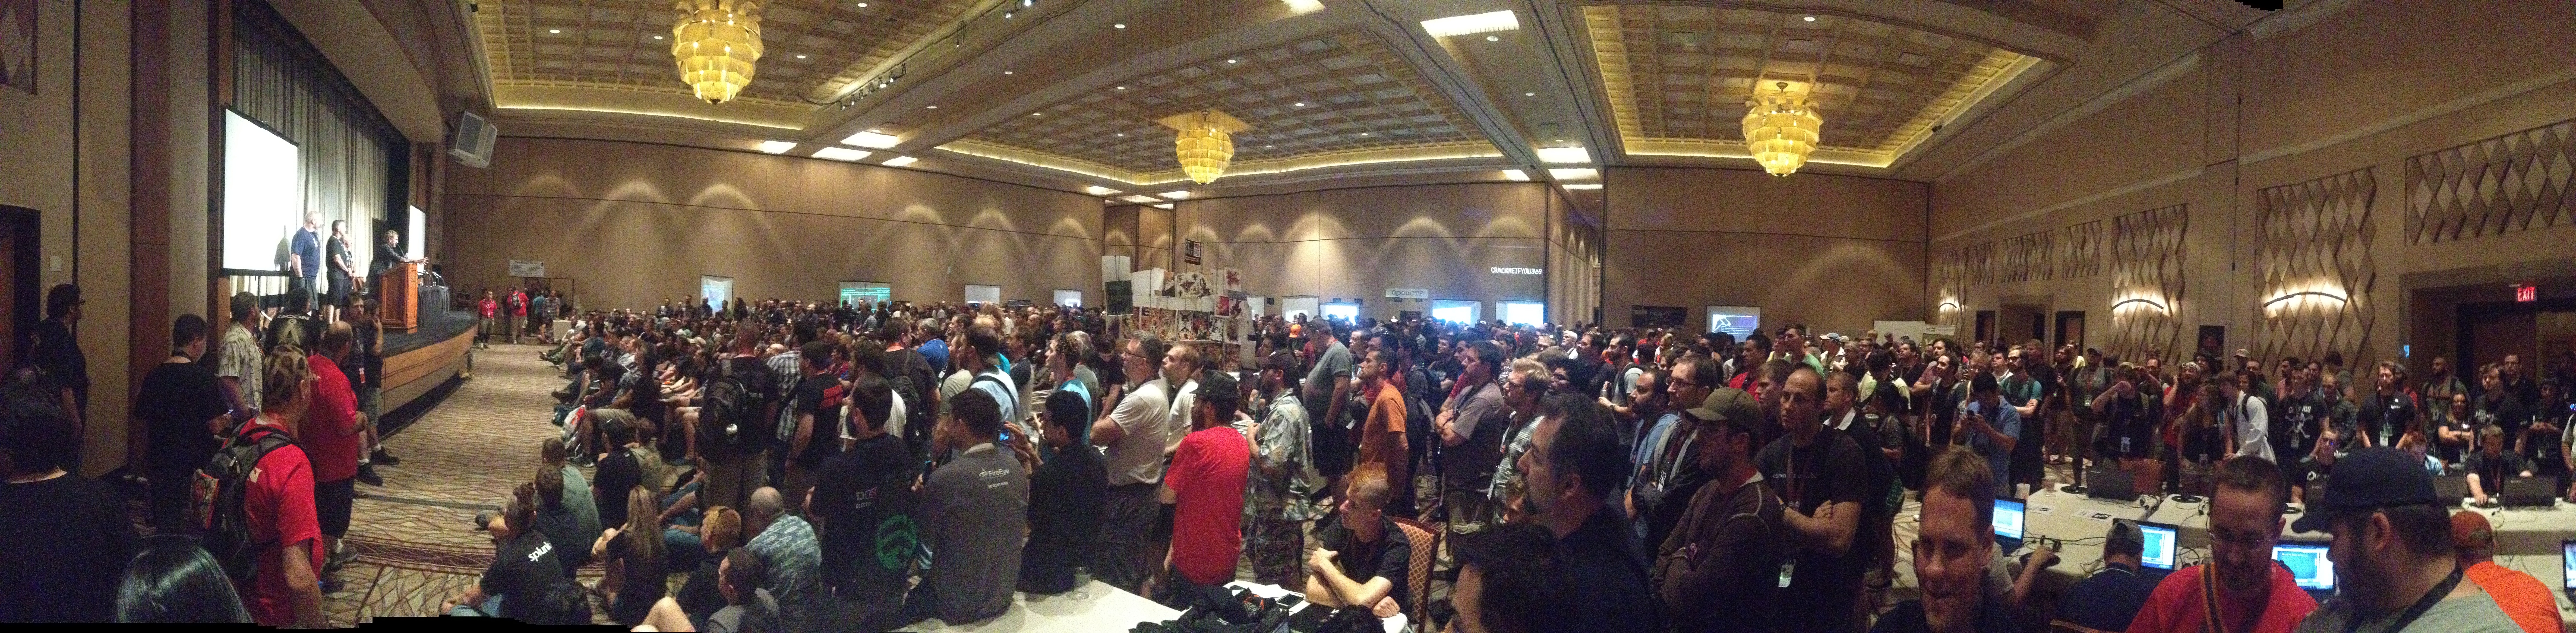 John McAfee addresses the crowd at DEFCON 22